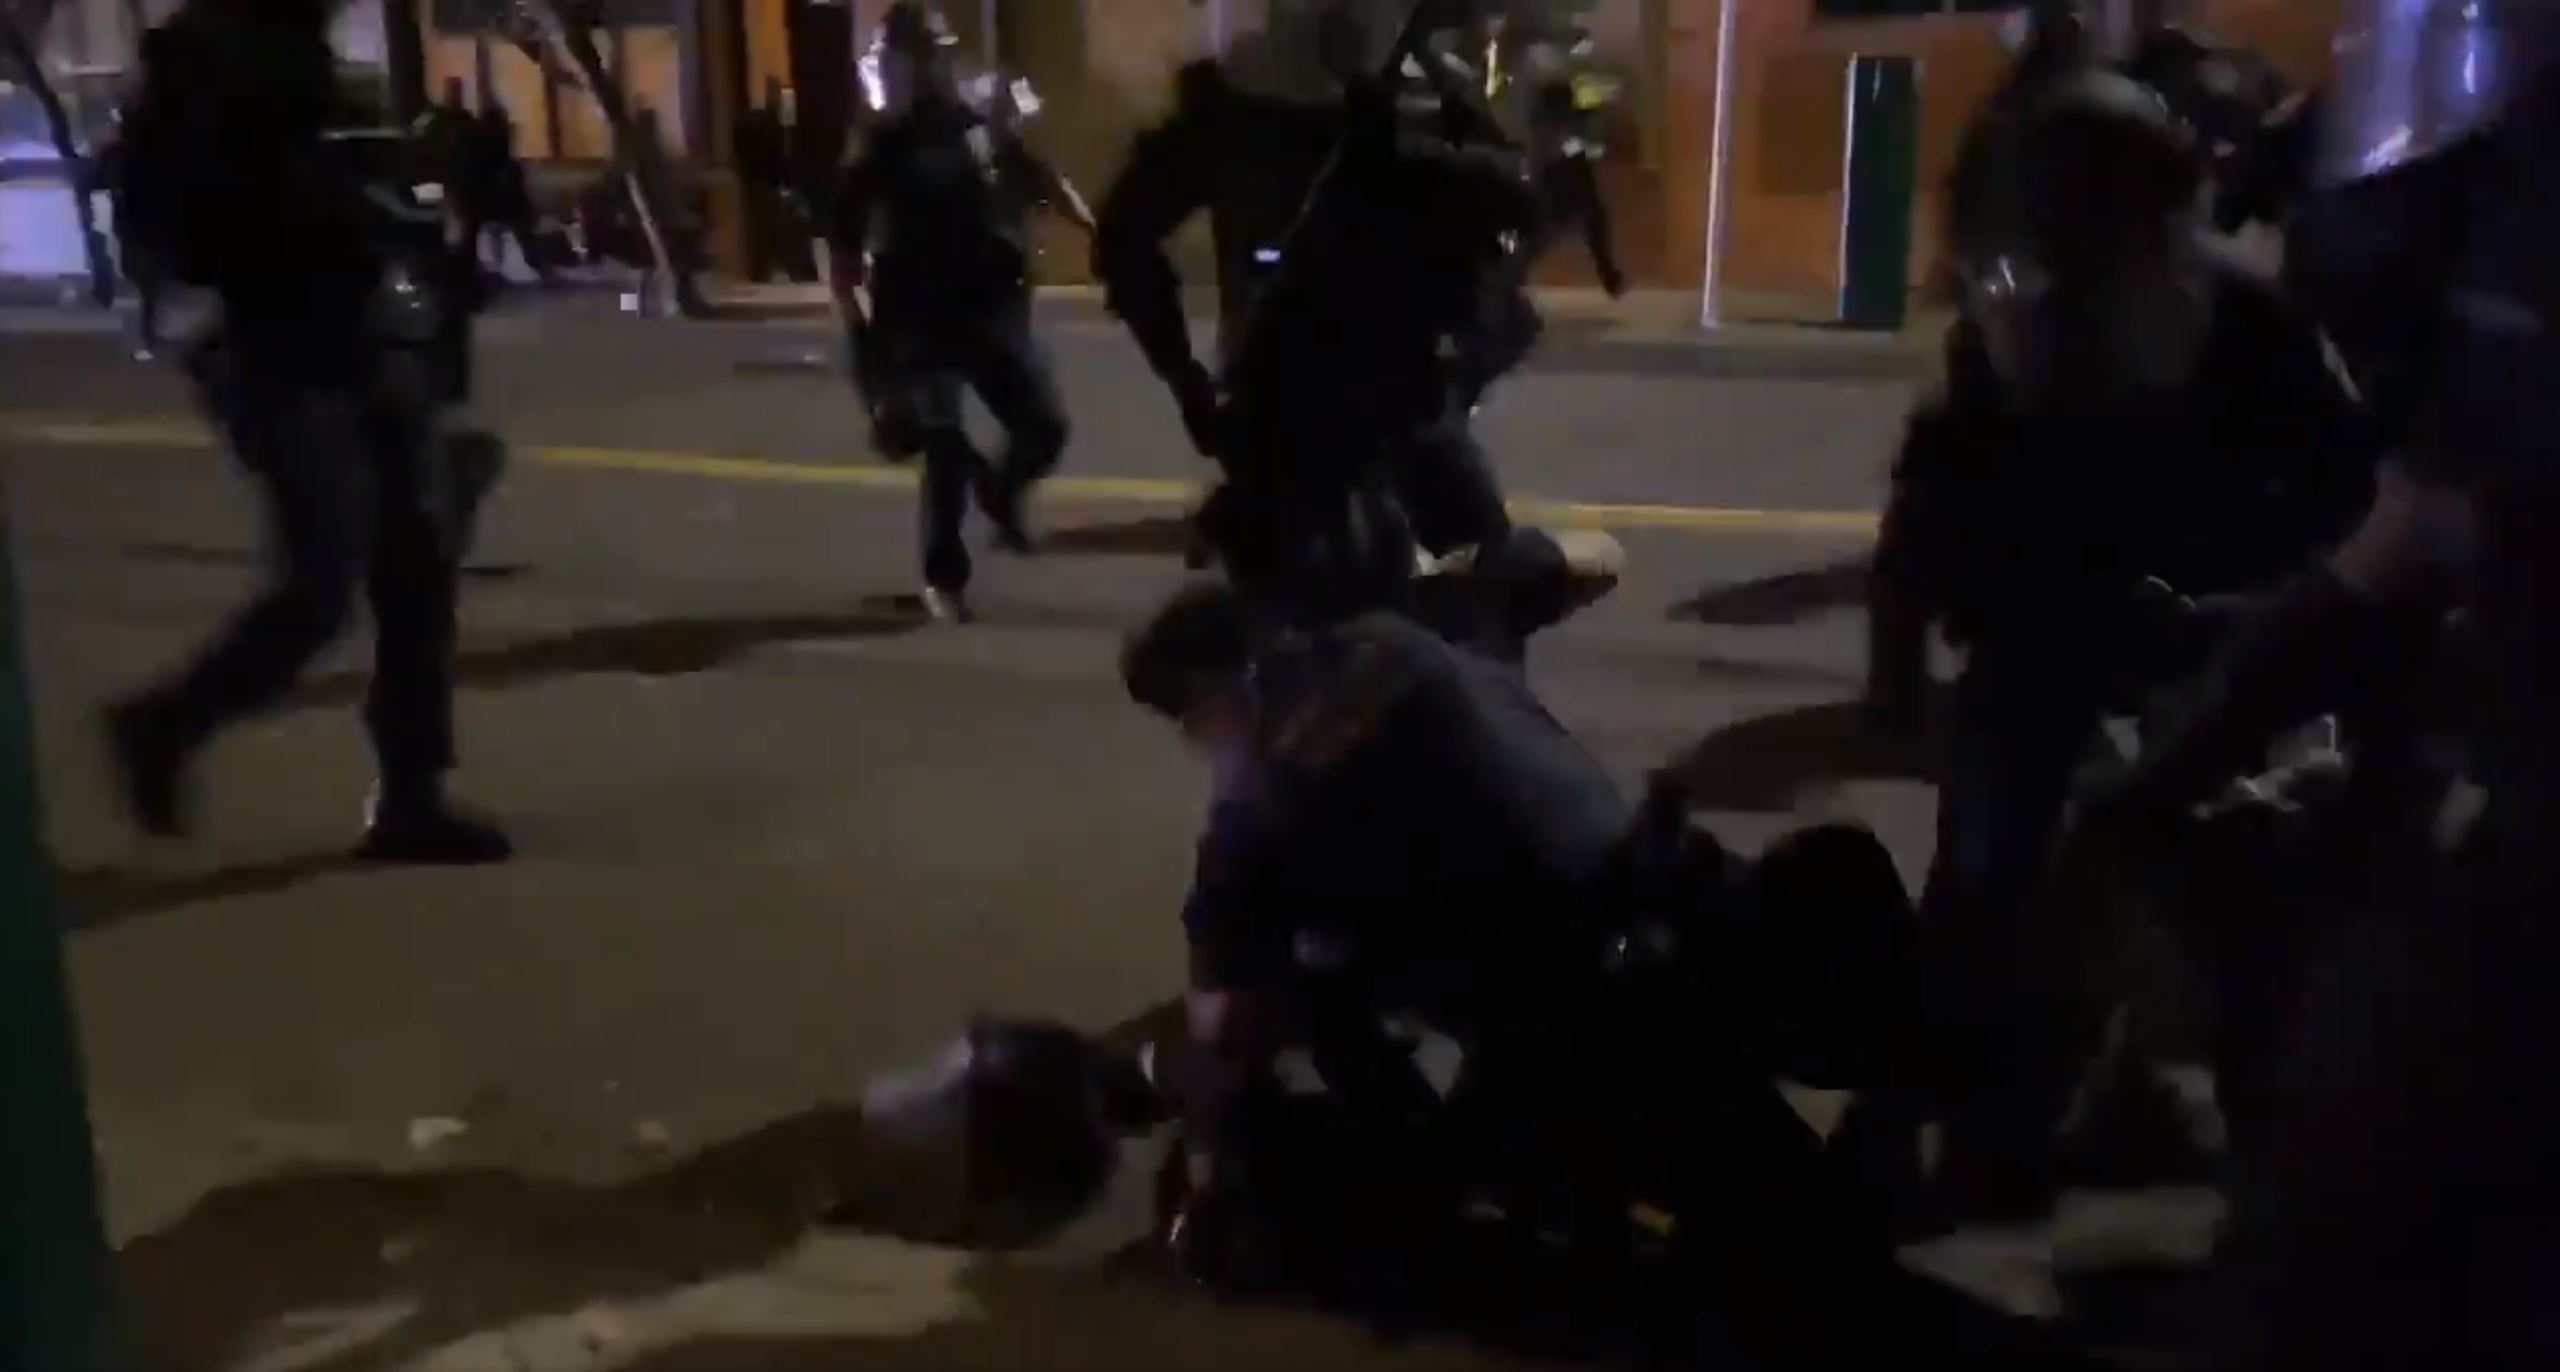 A Portland police officer punches a protester after throwing them to the ground while dispersing a demonstration Monday, Aug. 31, 2020, in Portland, Ore.